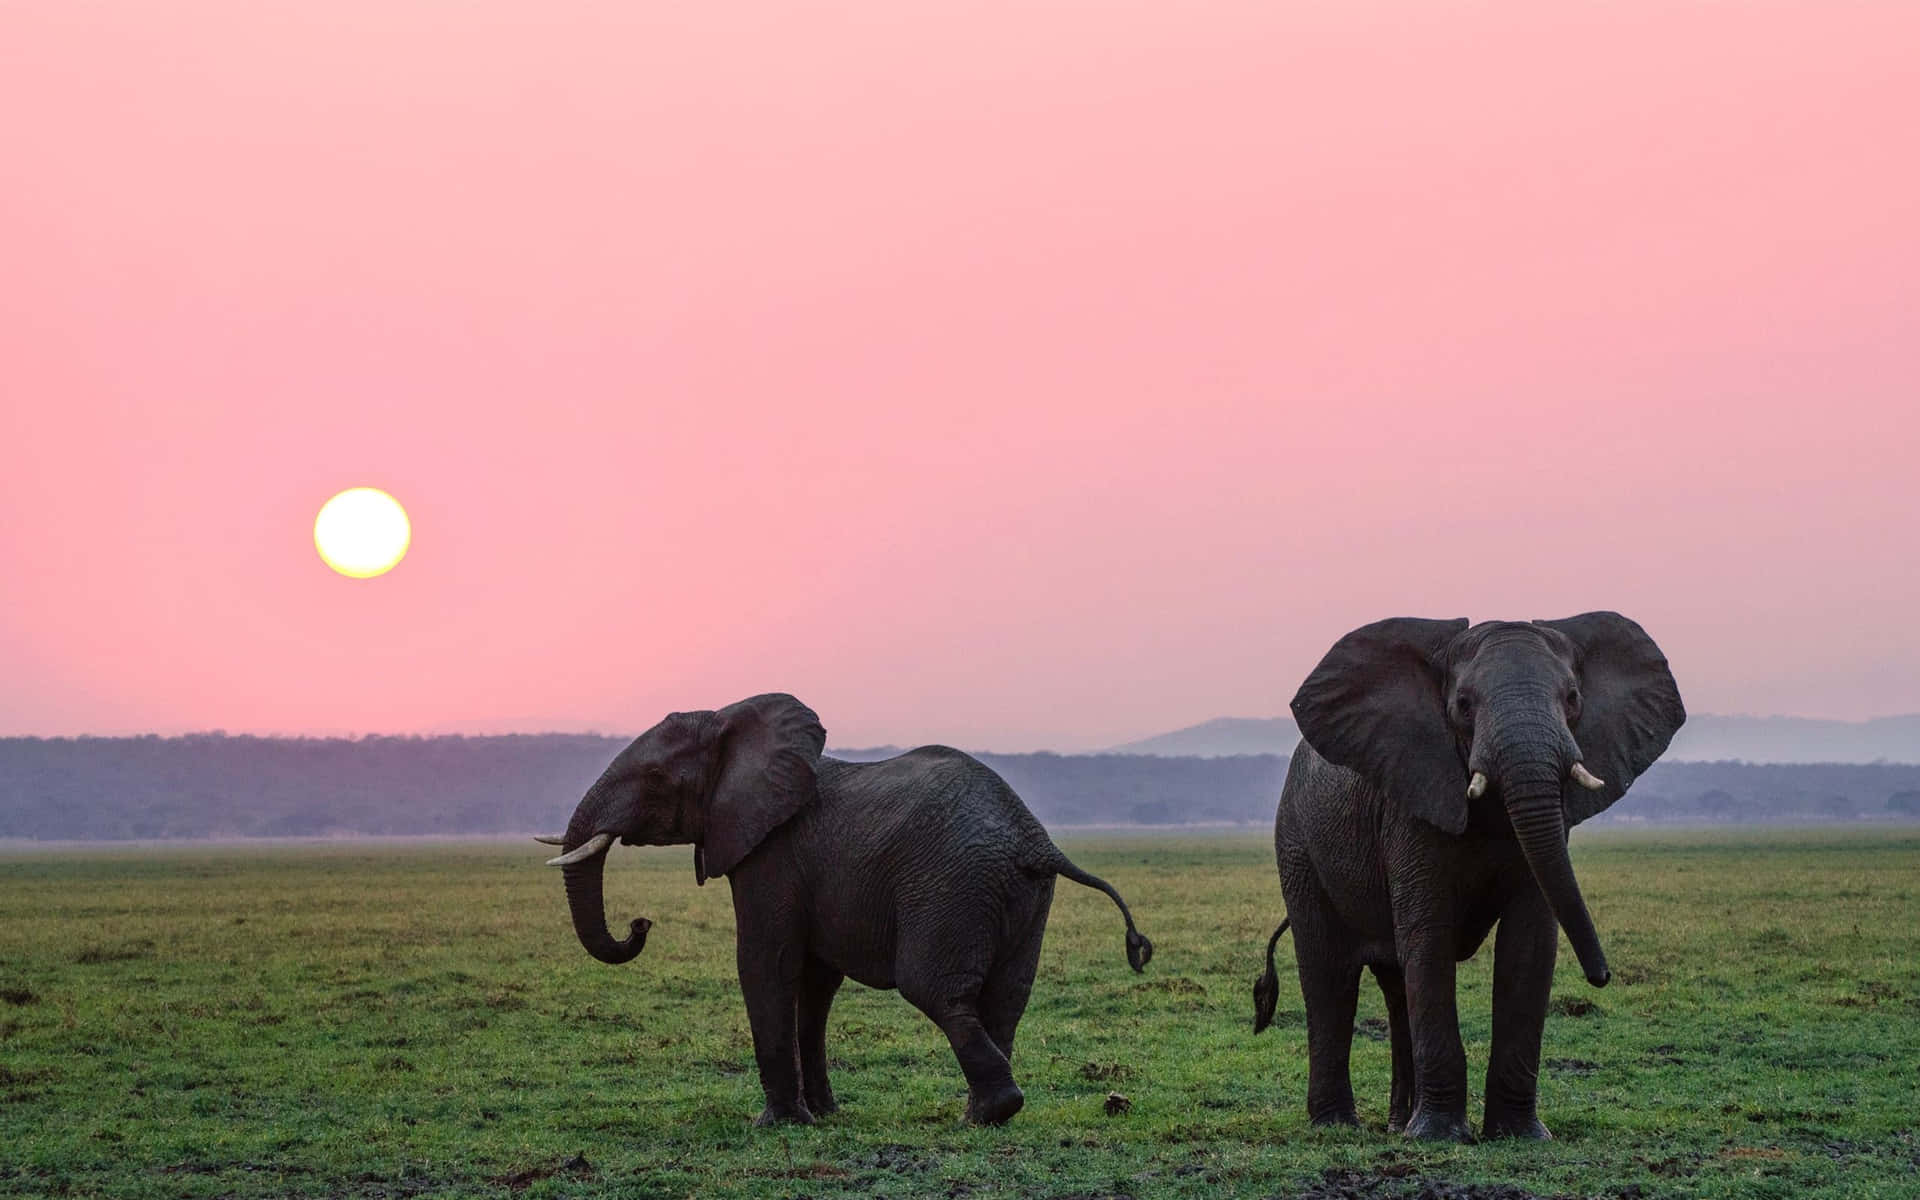 two elephants walking in the grass at sunset